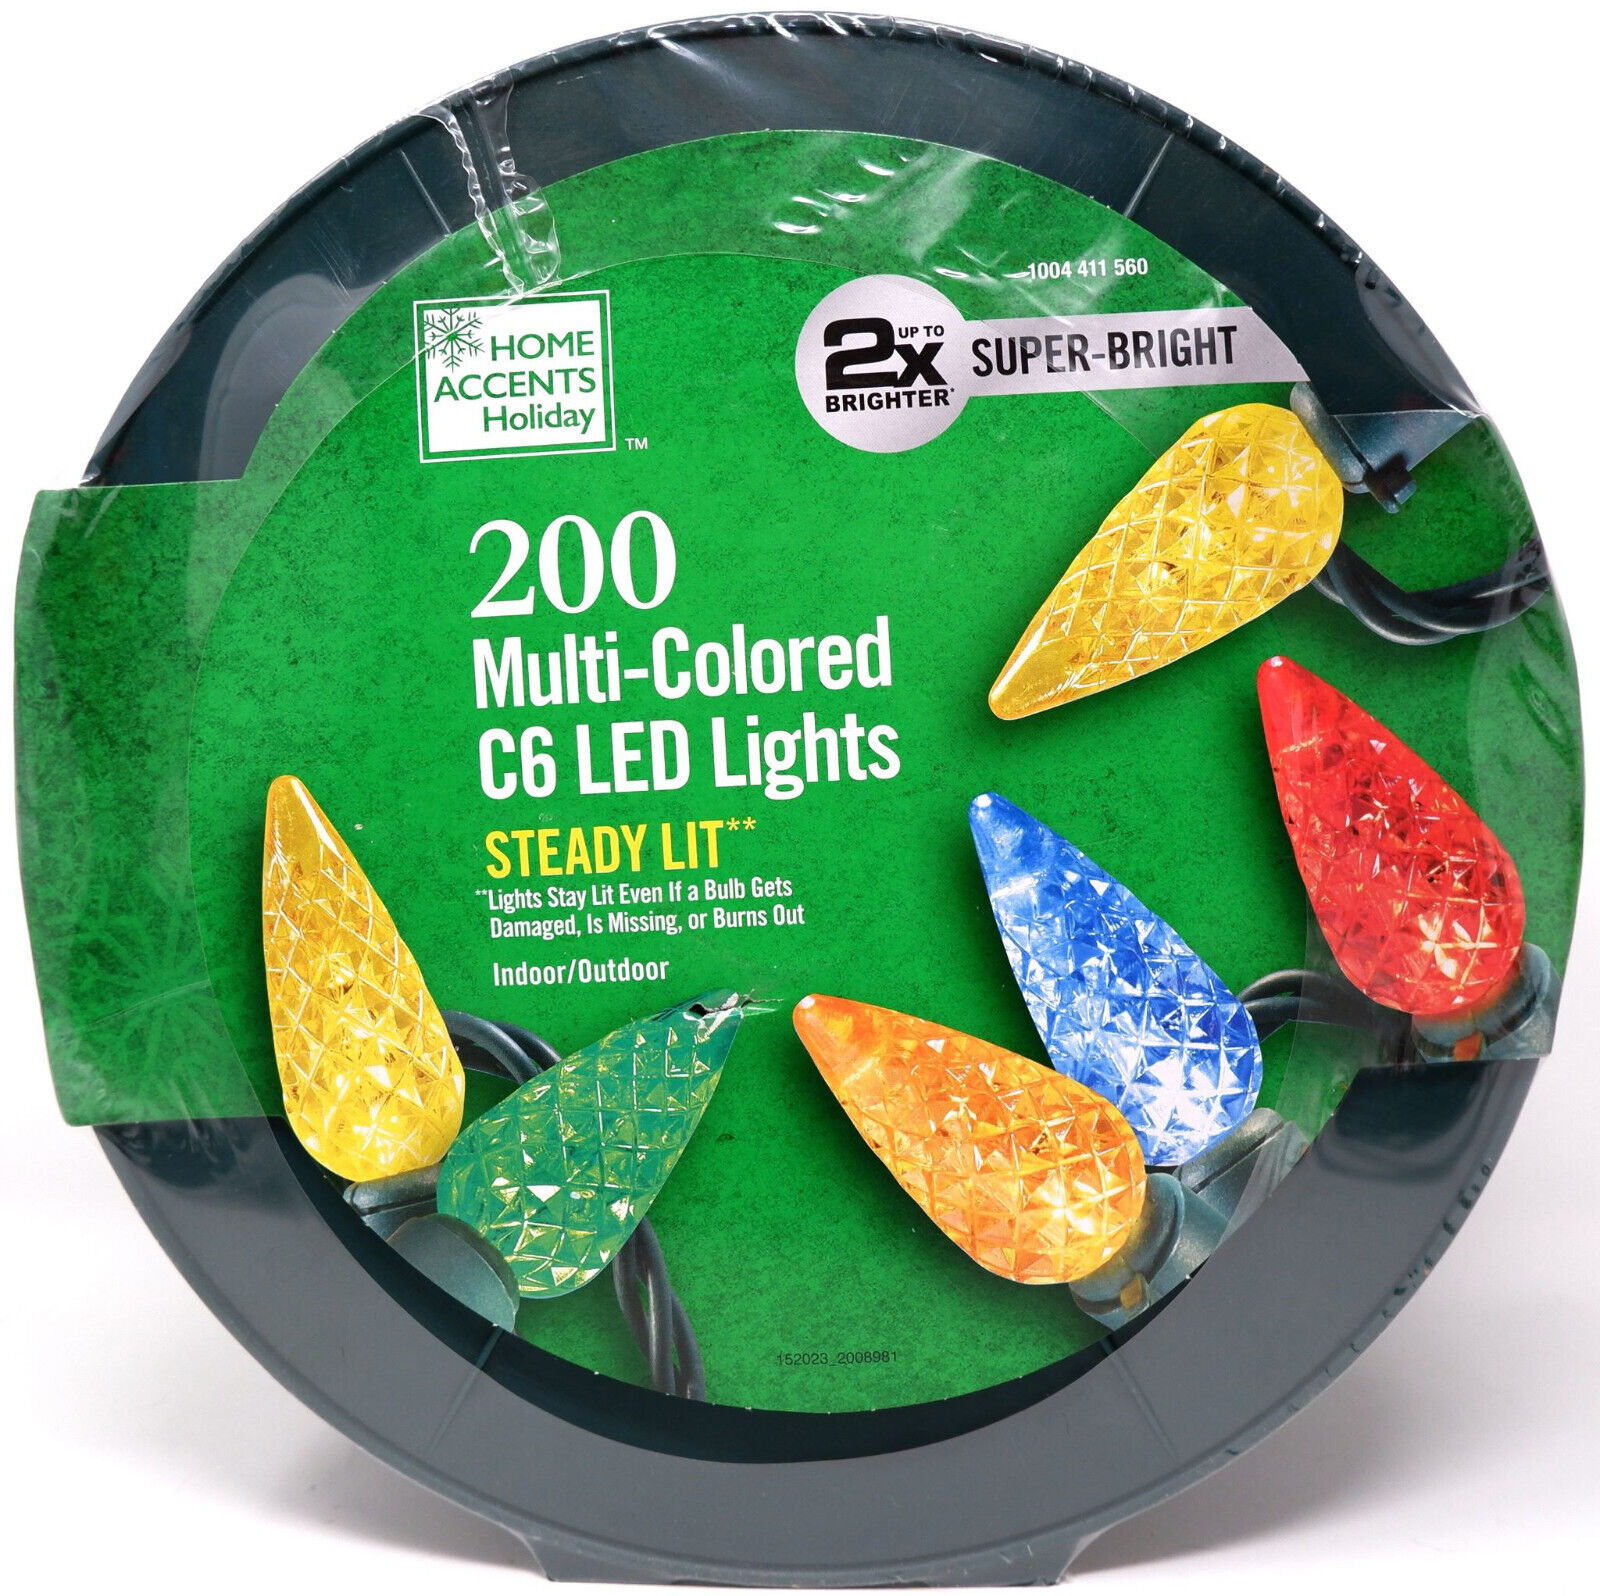 Primary image for HOME ACCENTS HOLIDAY 1004 411 560 200CT MULTICOLOR LED C6 66' GREEN STRING - NEW